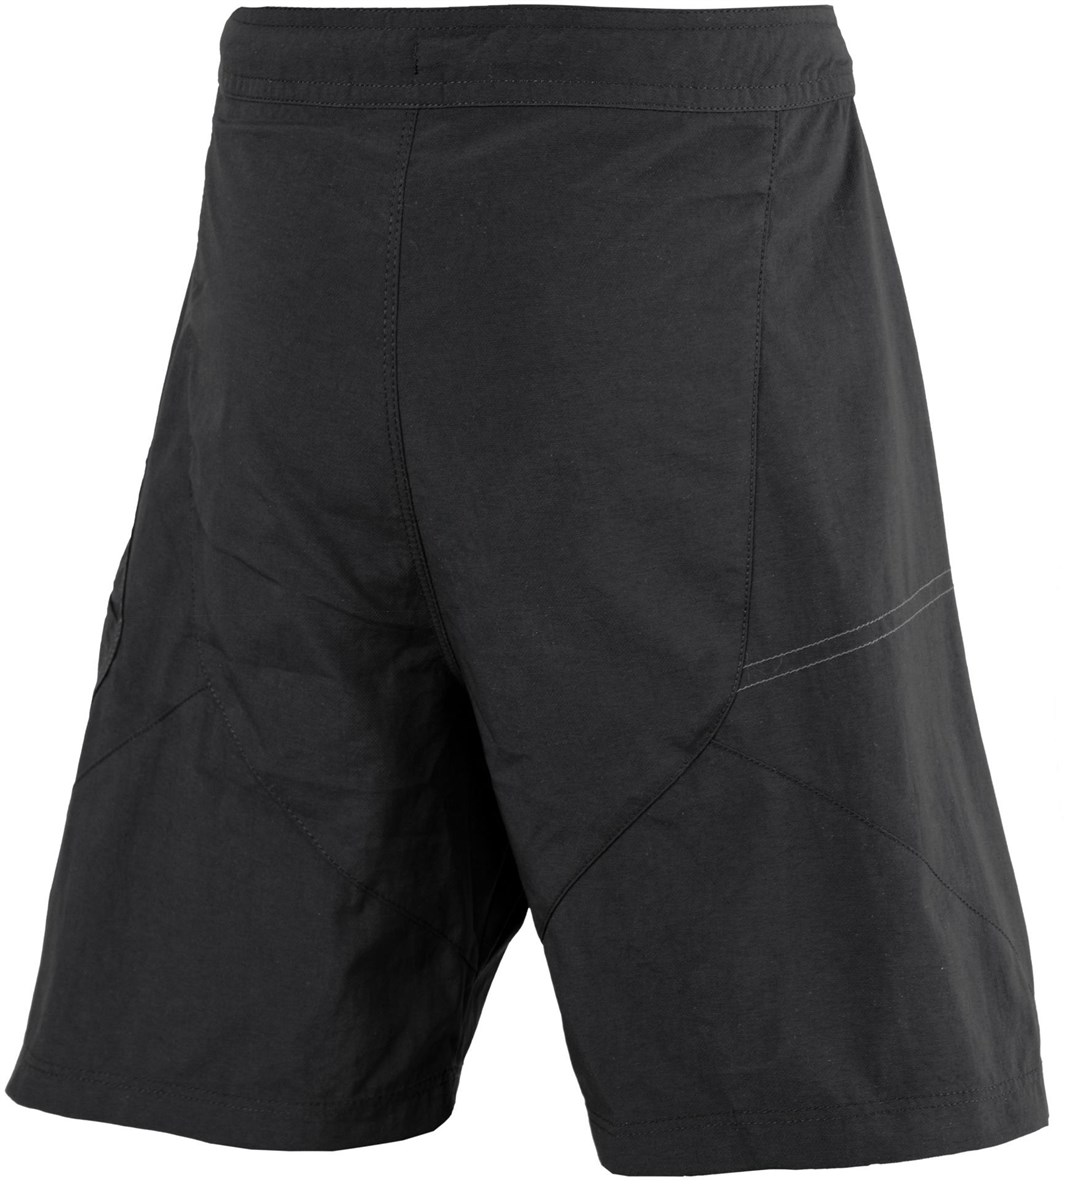 Scott Trail With Pad Junior Baggy Cycling Shorts